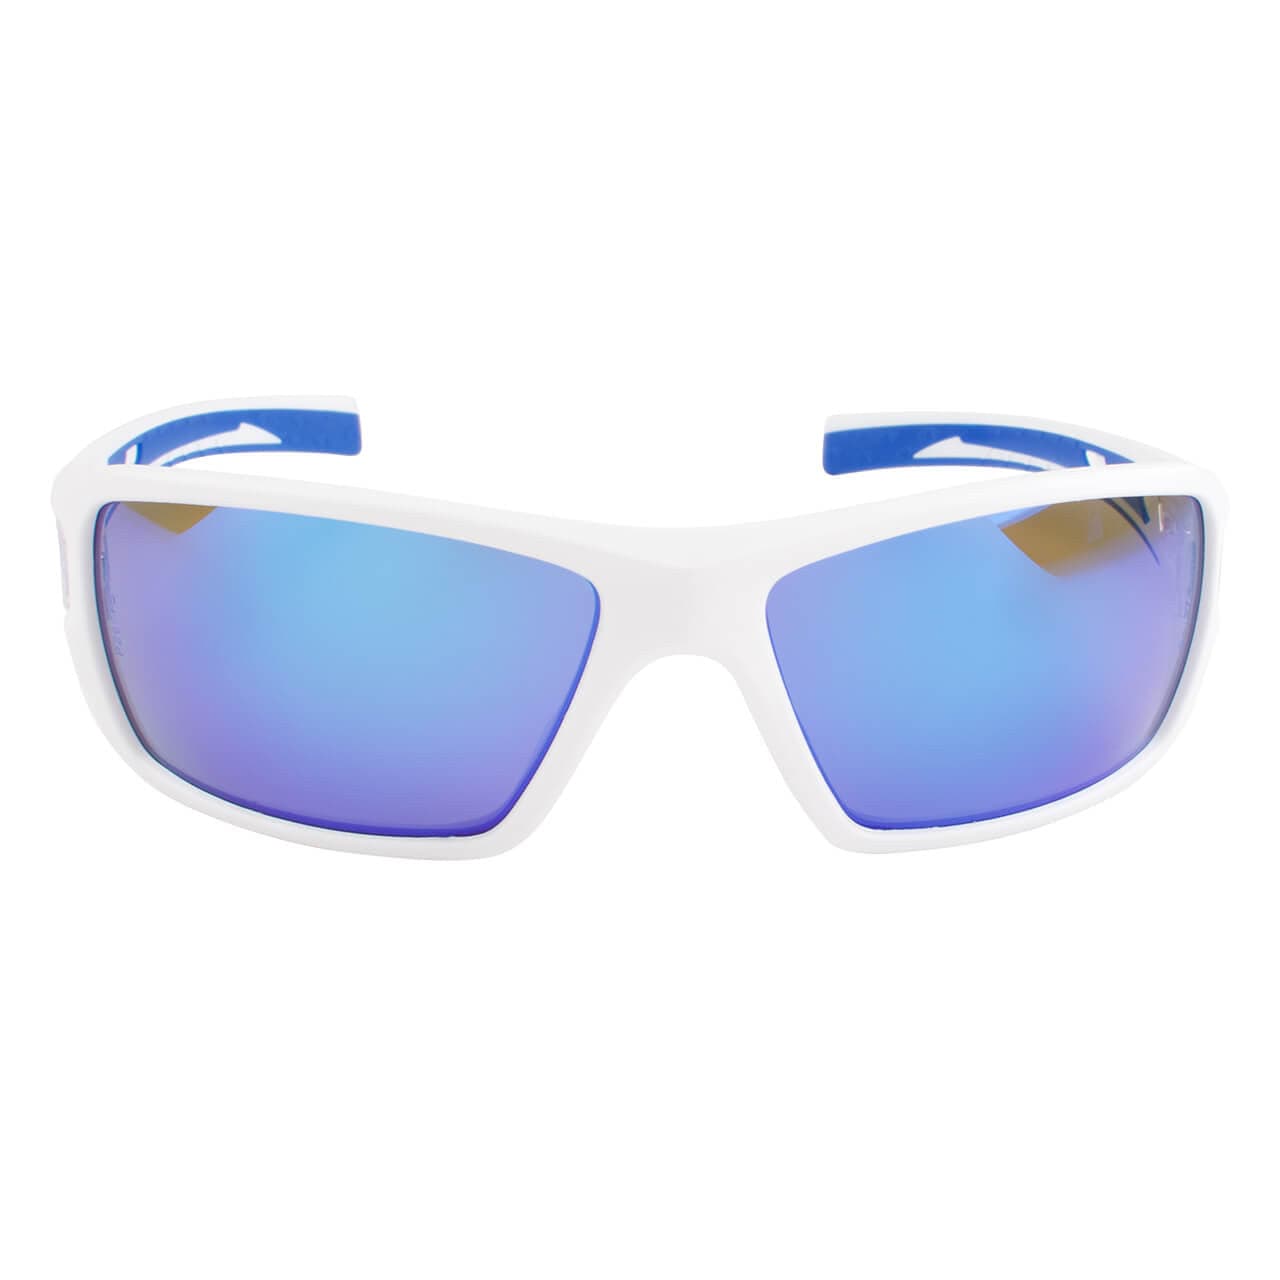 Metel M30 Safety Glasses with White Frame and Blue Mirror Lenses Front View